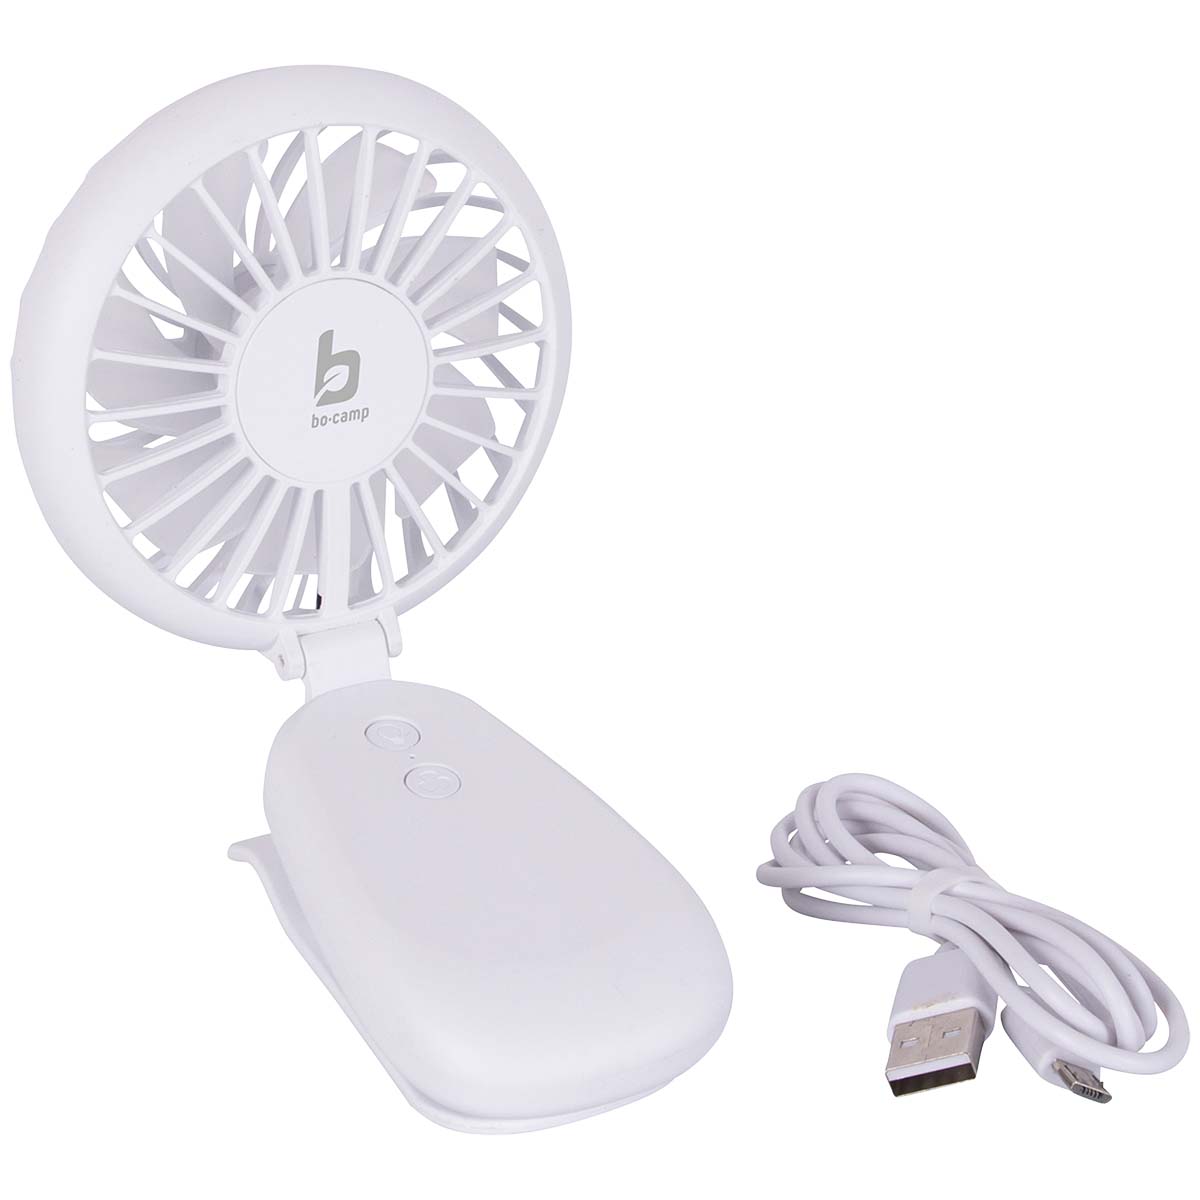 8520960 A handy rechargeable table fan with clamp. Ideal for cooling down on hot days. With the clamp easy to attach to for example a table, chair or tent pole. Has 2 different ventilation modes and 2 color modes (red/blue). Also compact foldable and rechargeable with included USB cable. Very suitable for camping, in the house, on the balcony etc.